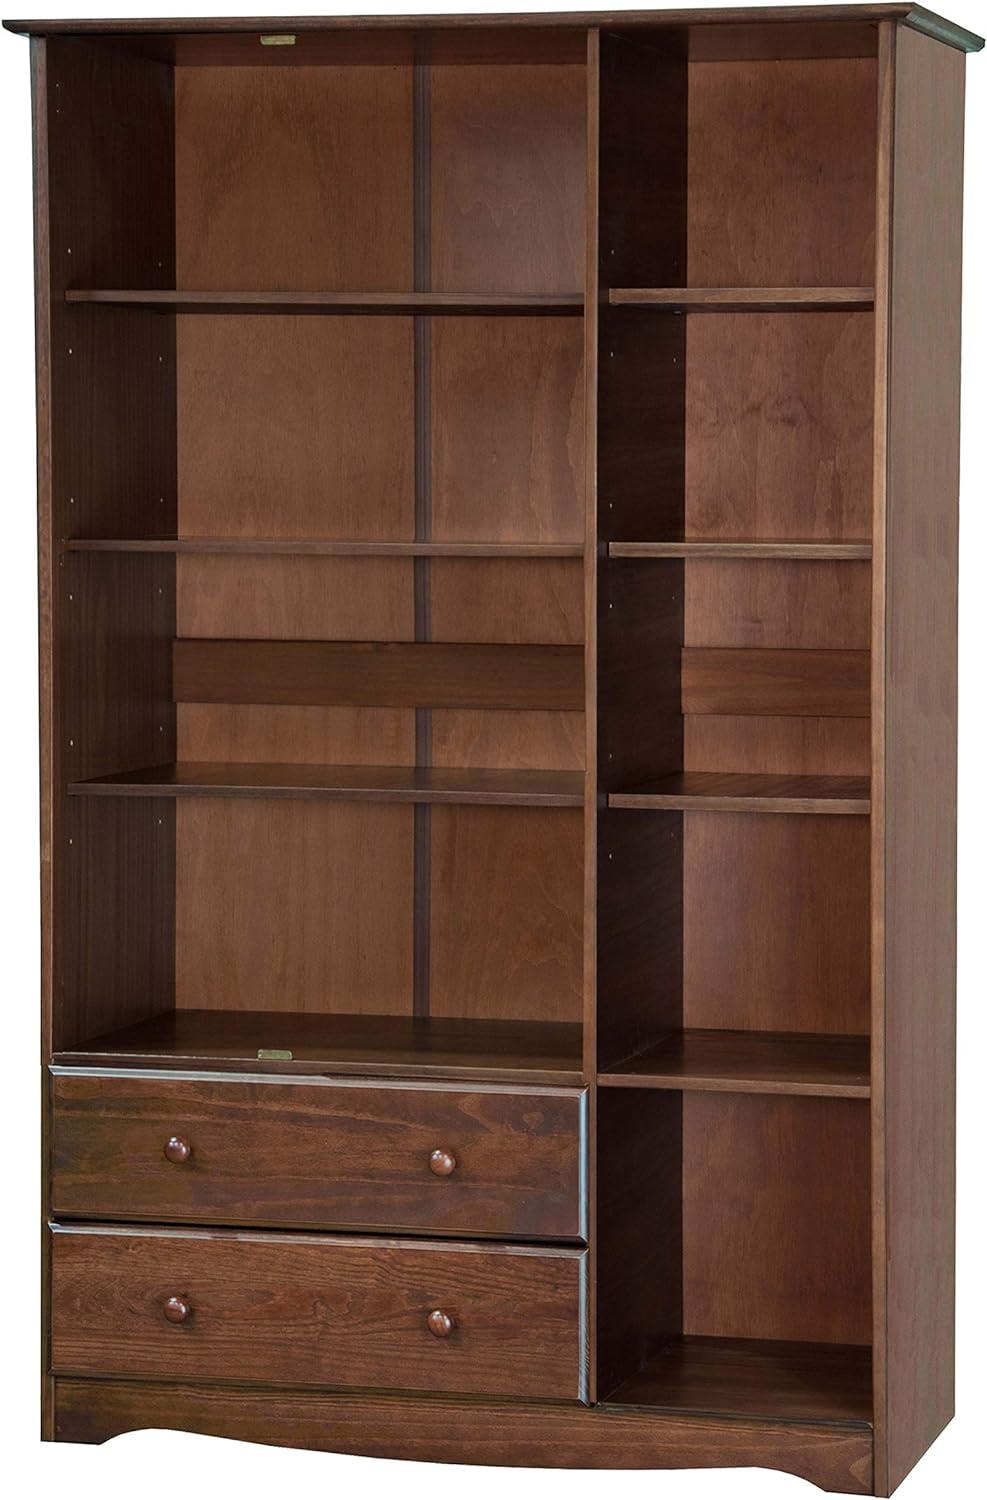 Eco-Friendly Mocha Solid Wood Transitional Grand Wardrobe with Shelves and Drawers